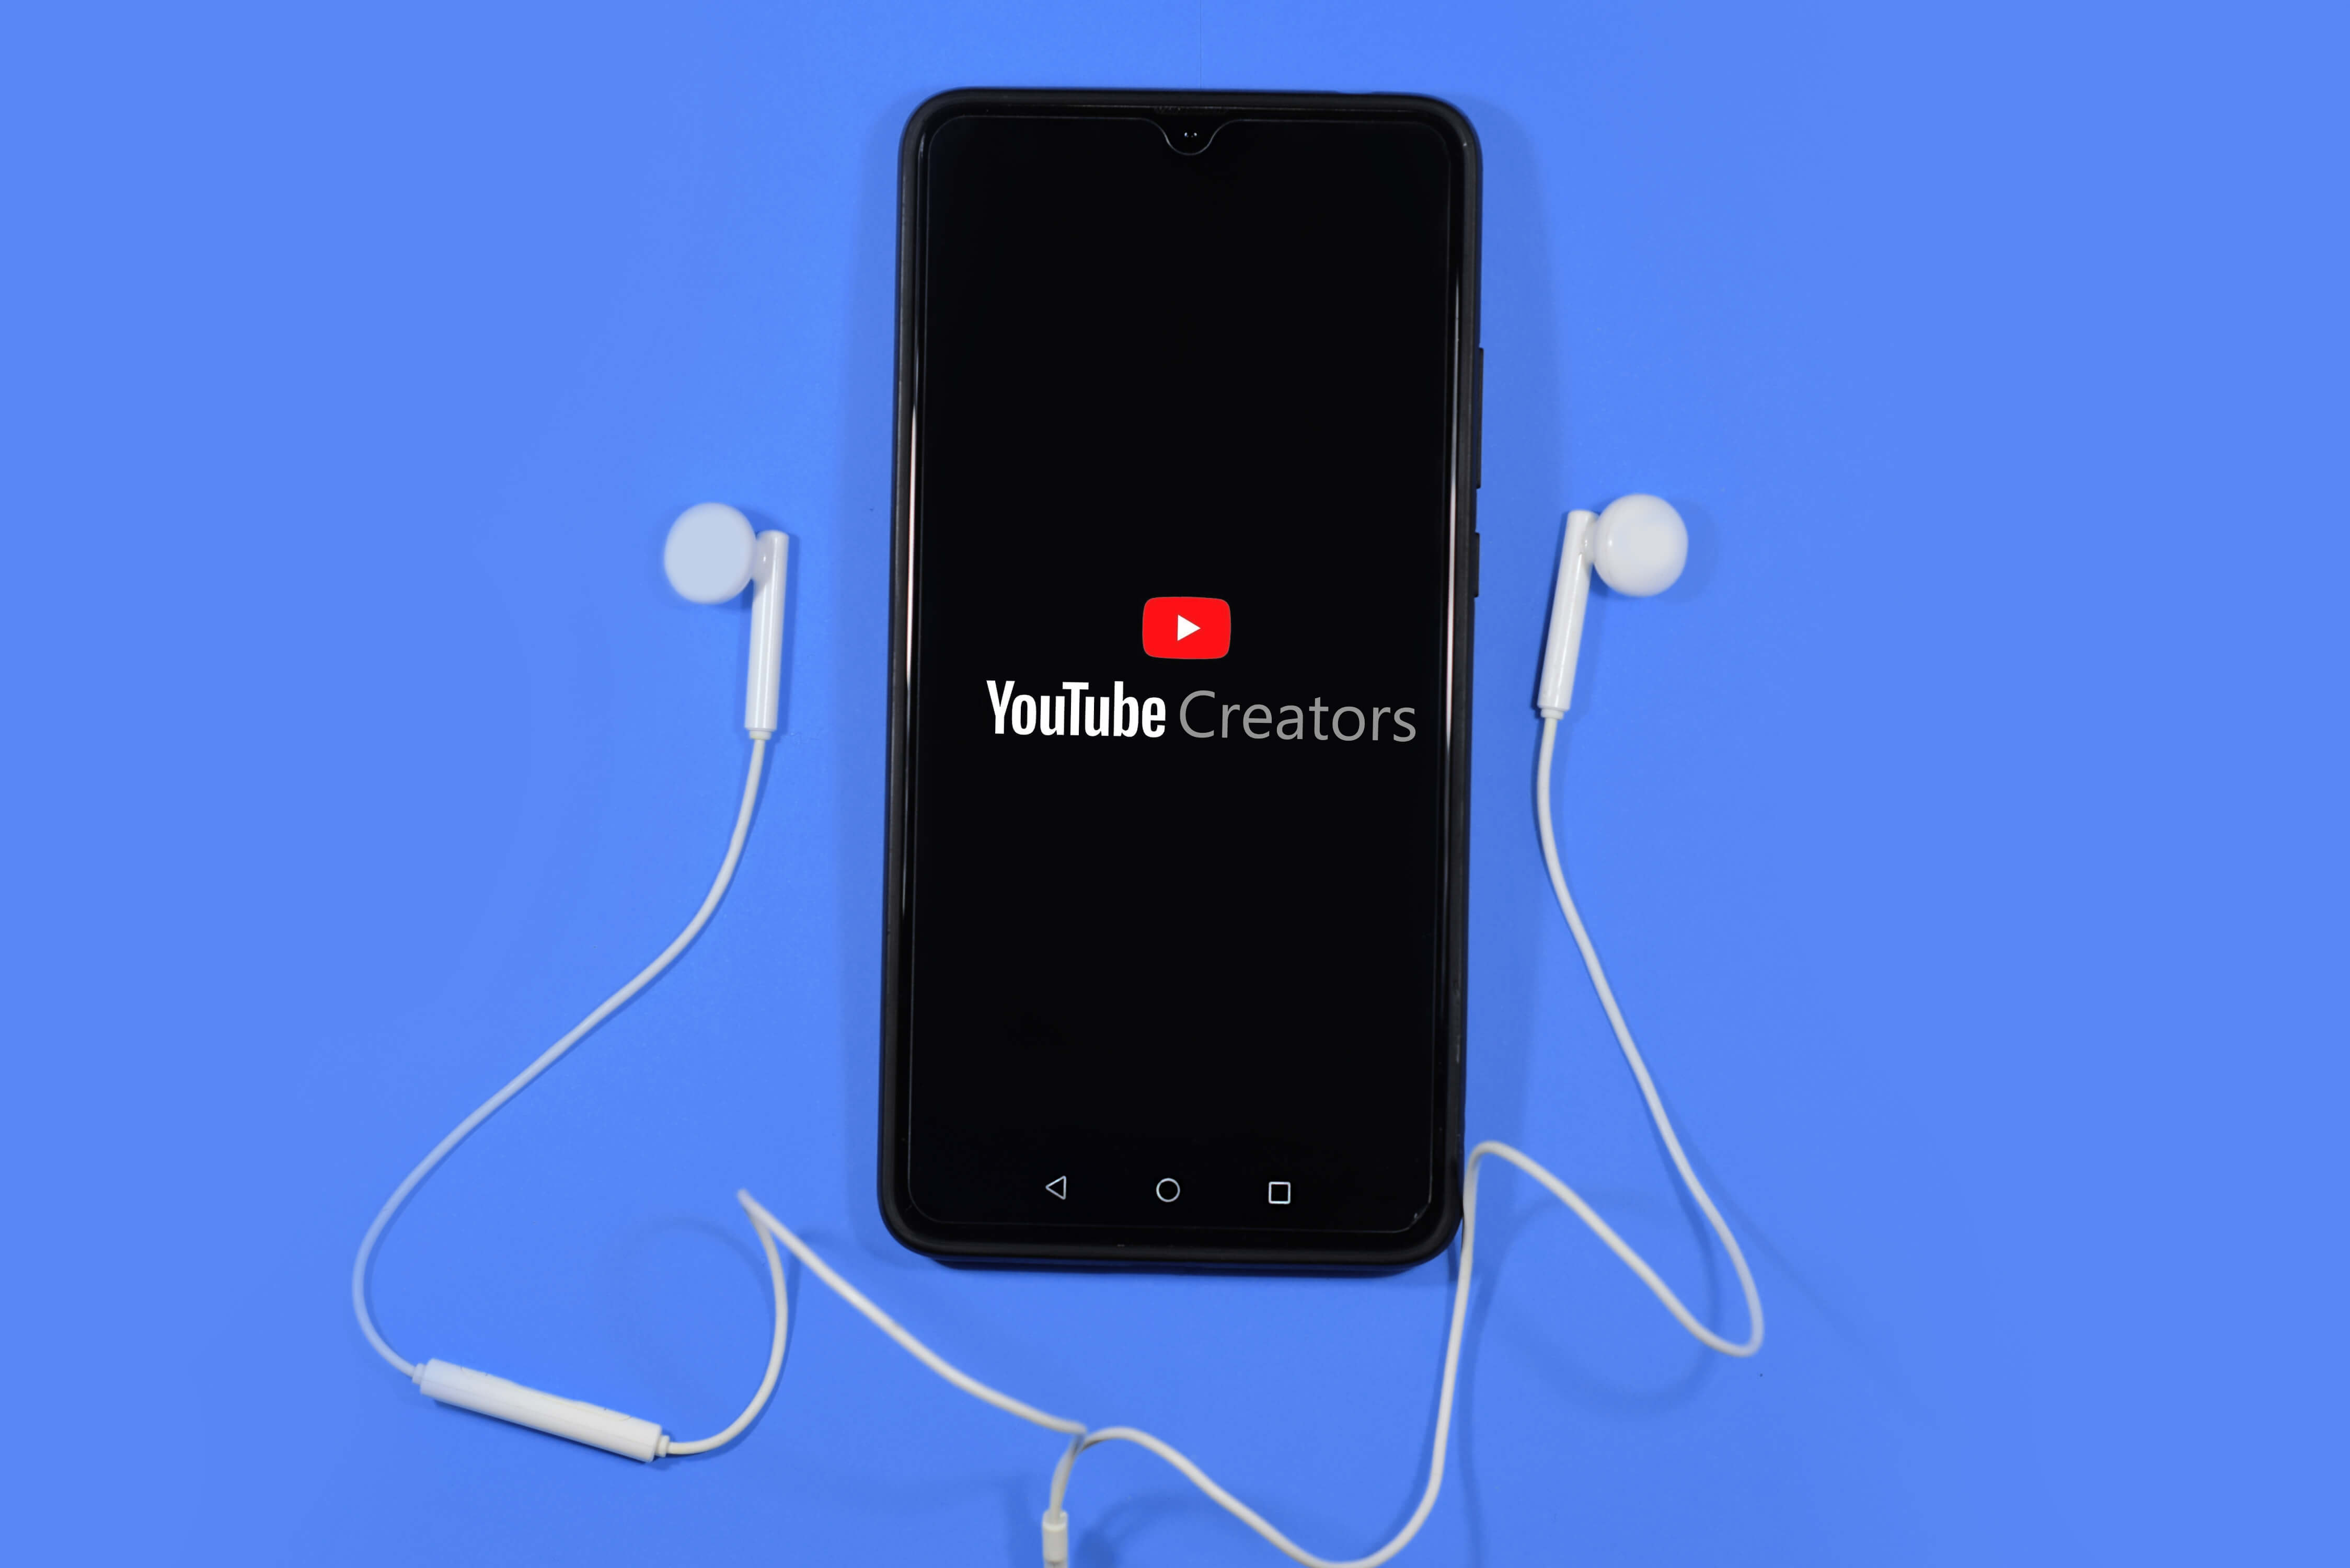 YouTube is one the most used video platforms worldwide.